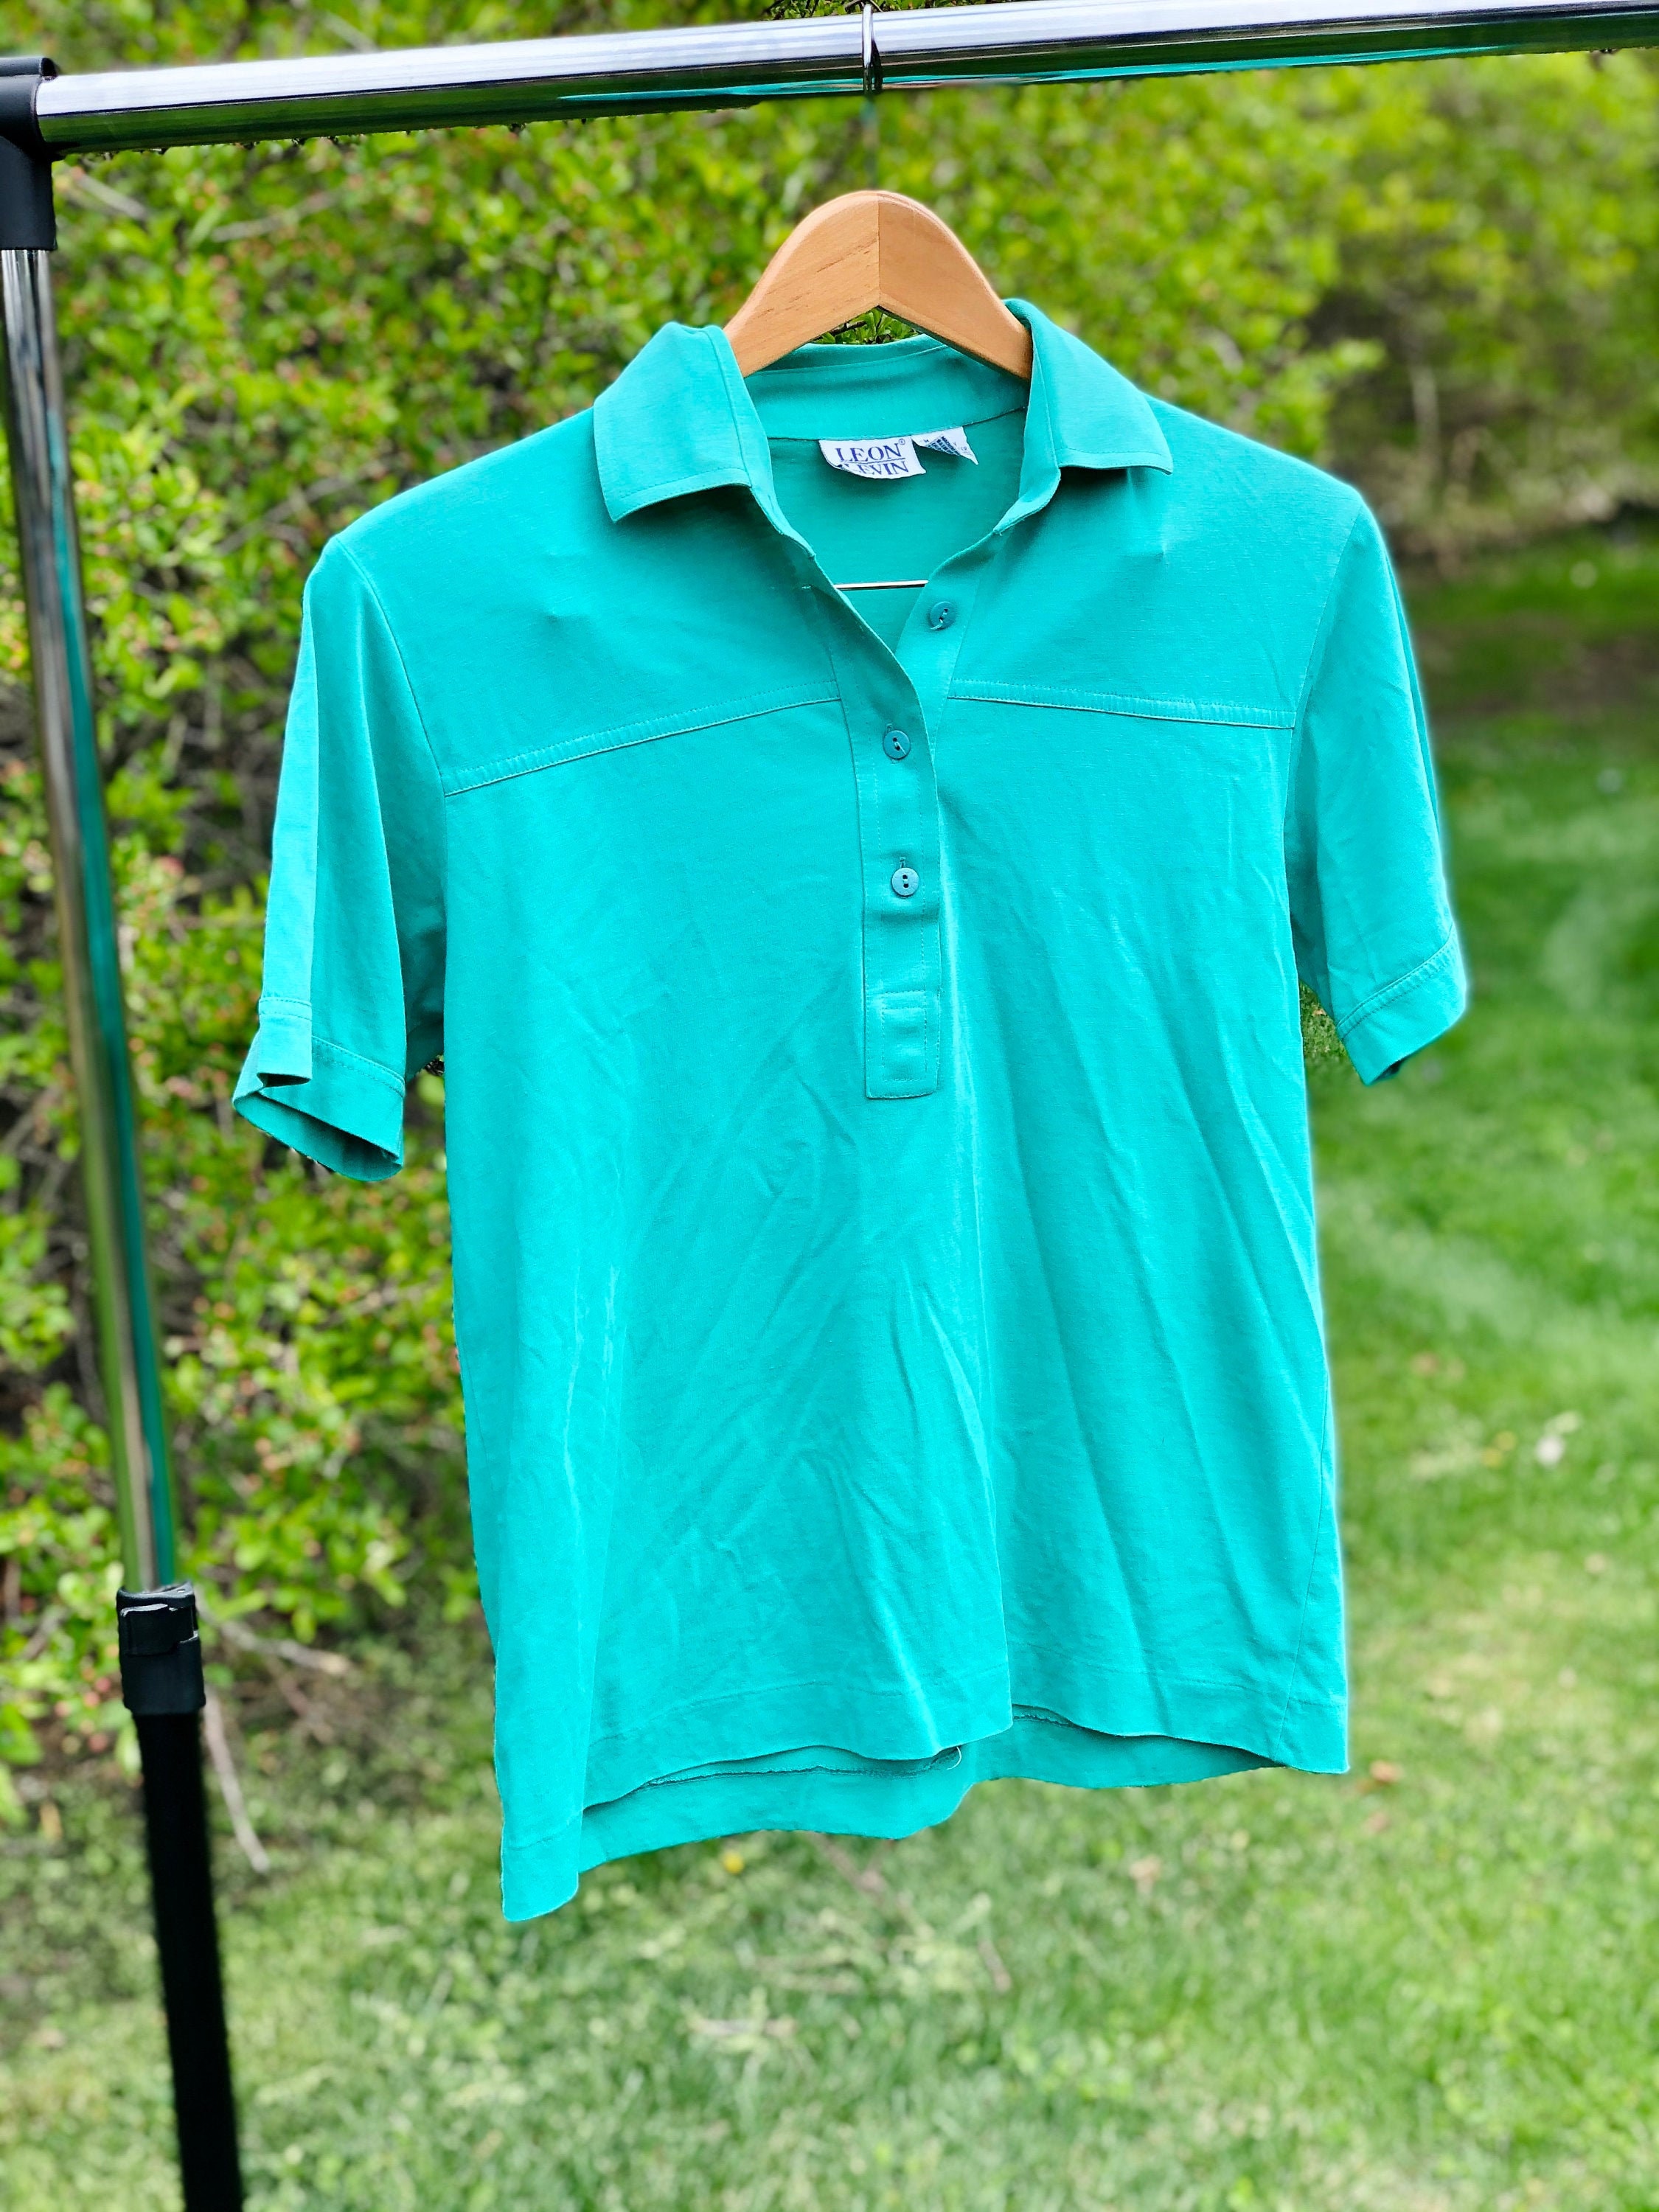 Vintage Polo Shirt 1970s Leon Levin Golf Teal Size | Etsy